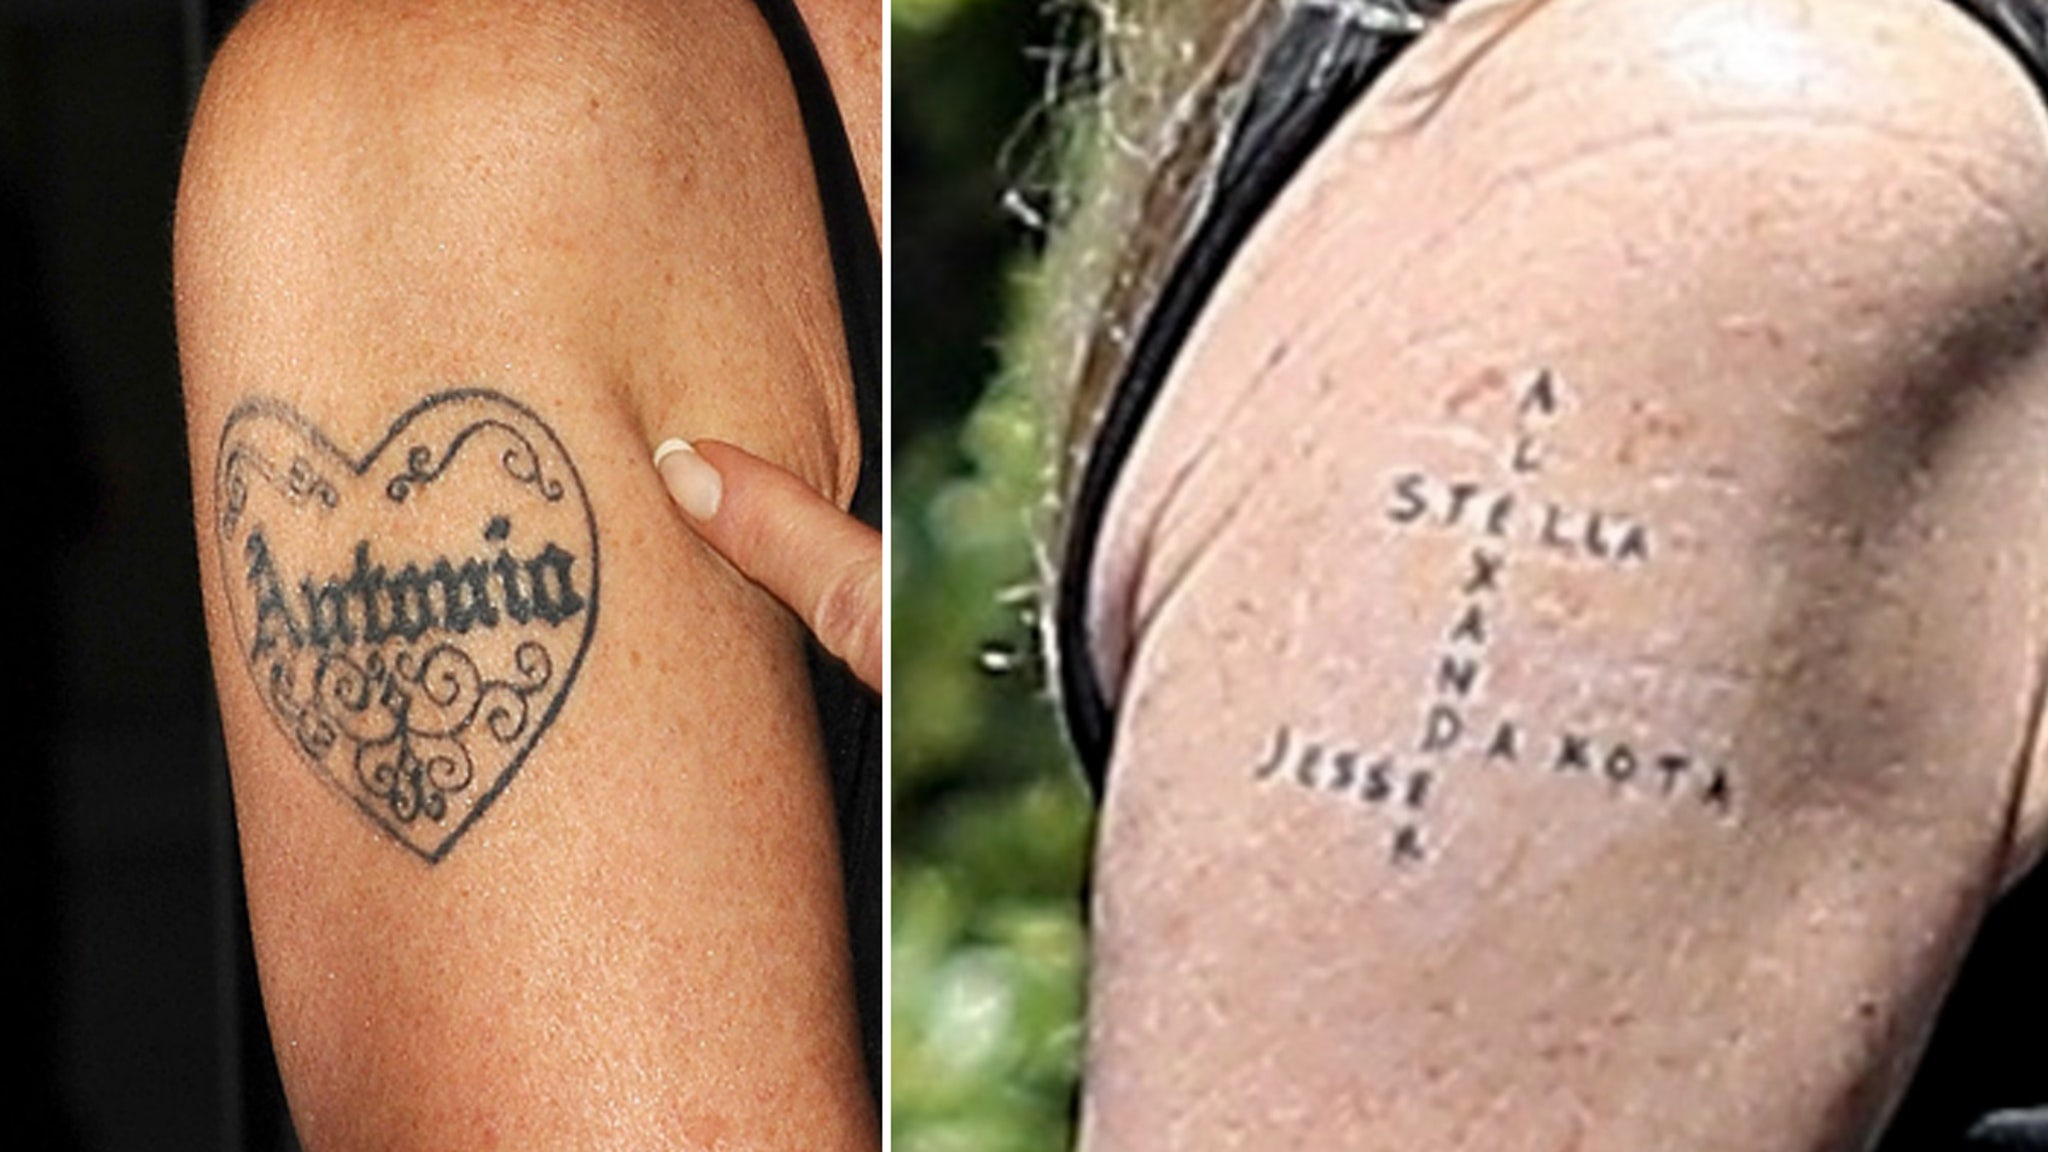 Melanie Griffith Shows Off Tattoo to Replace Antonio Banderas Ink